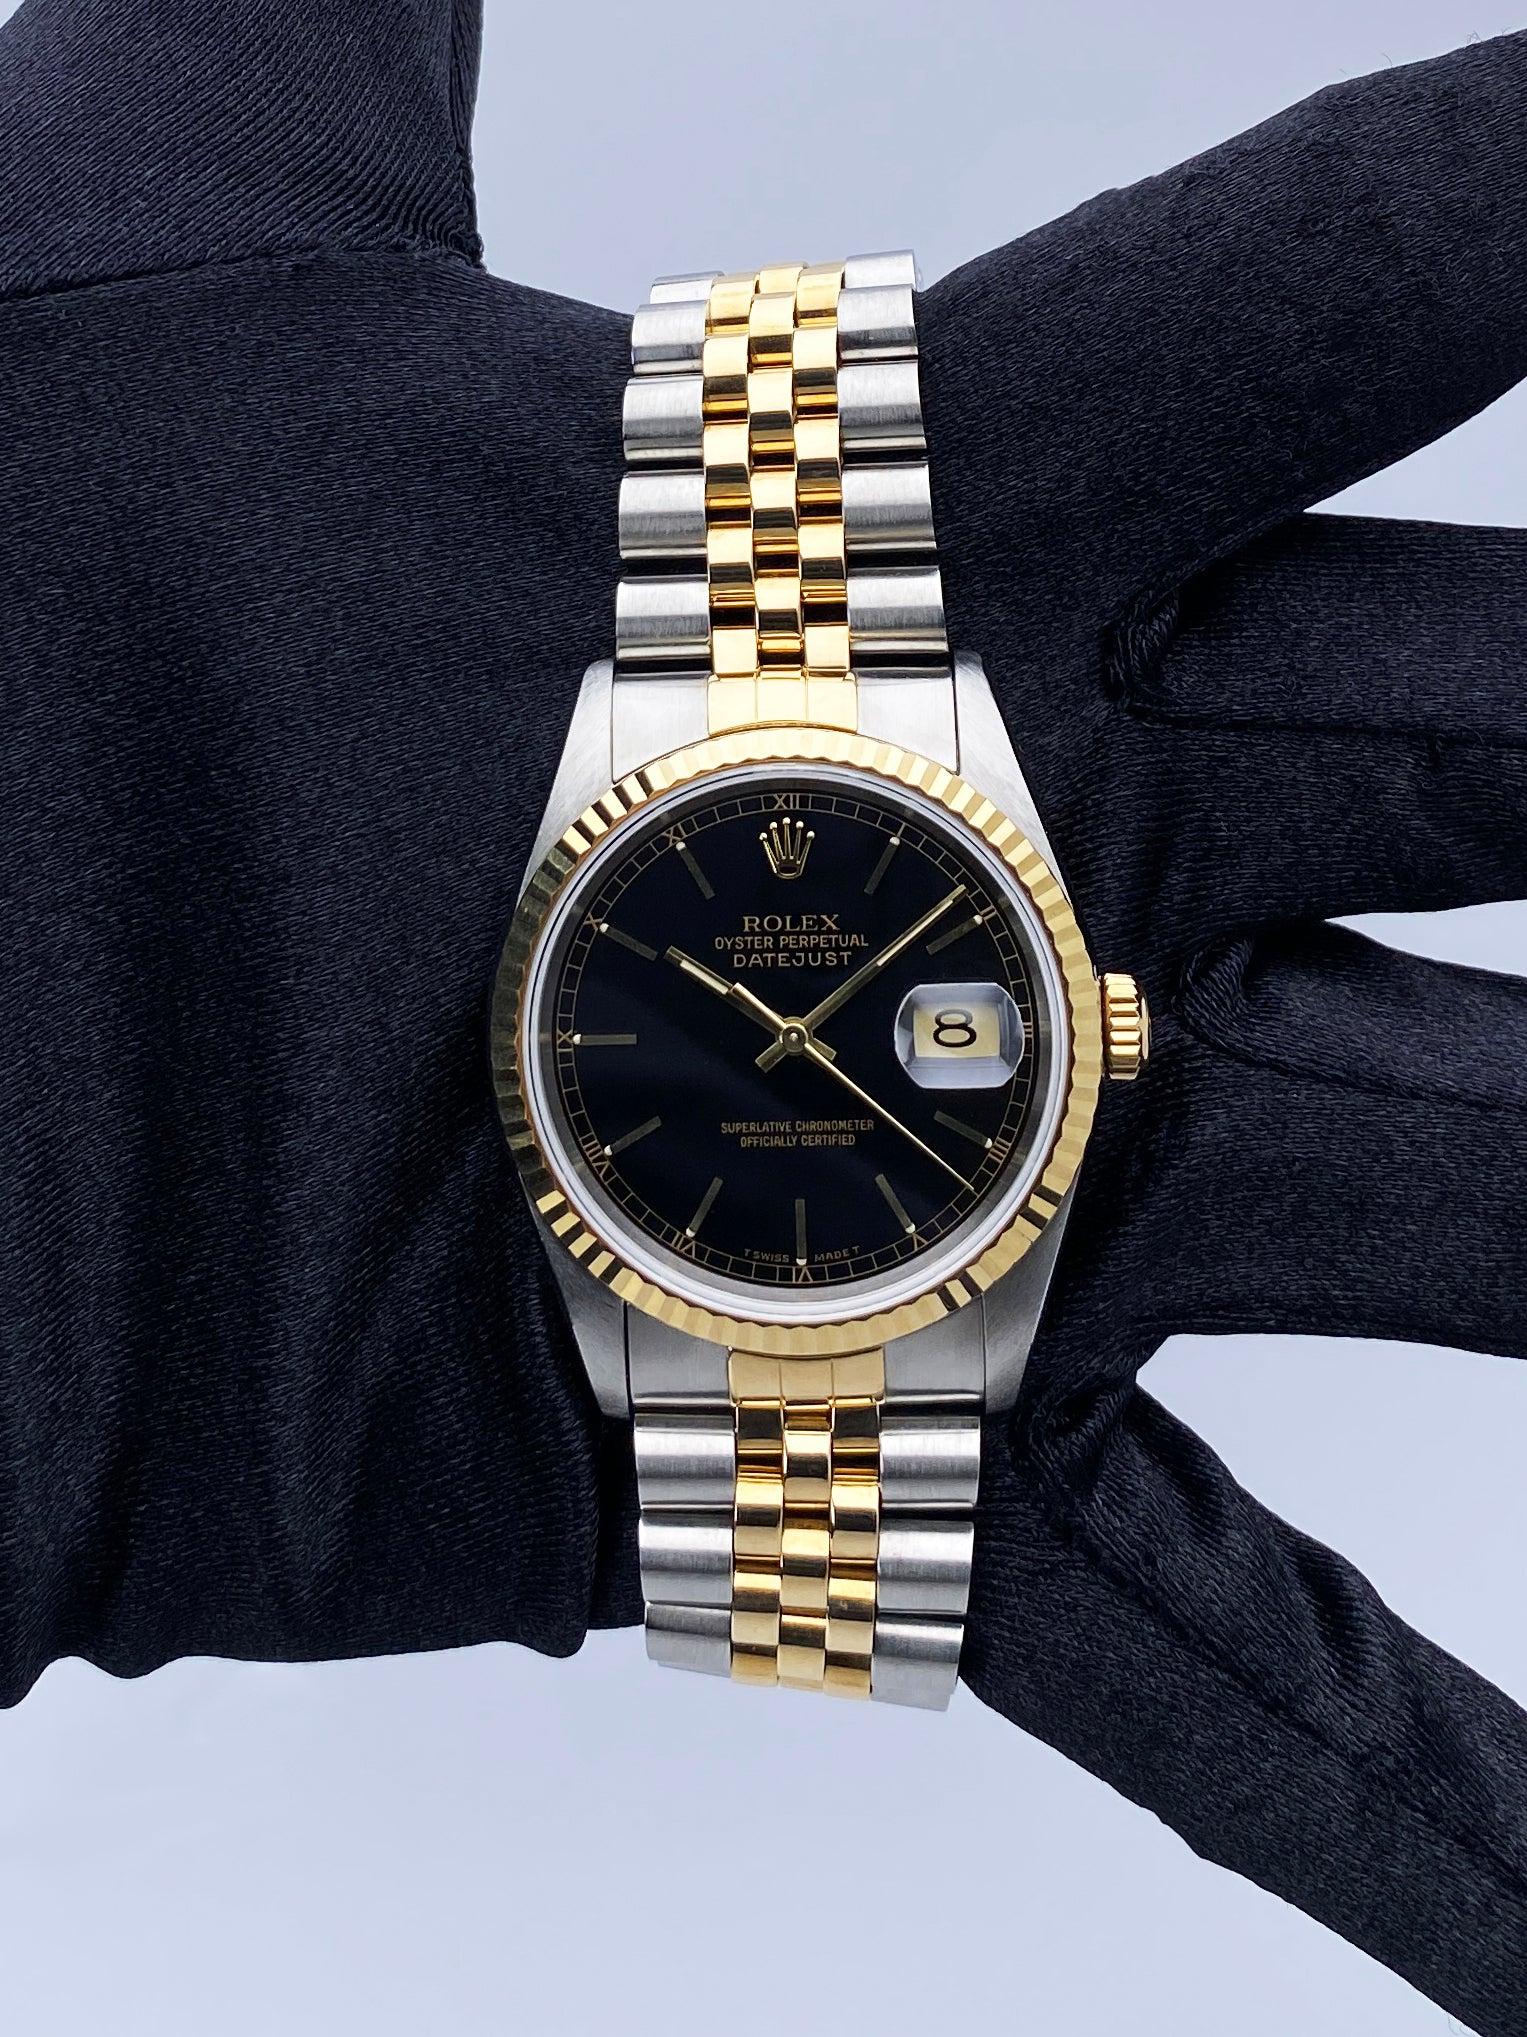 Rolex Datejust 16233 Mens Watch. 36mm stainless steel case. 18K yellow gold fluted bezel. Black dial with gold hands and gold index hour markers. Minute markers on the outer dial. Date display at the 3 o'clock position. Stainless steel & 18k yellow